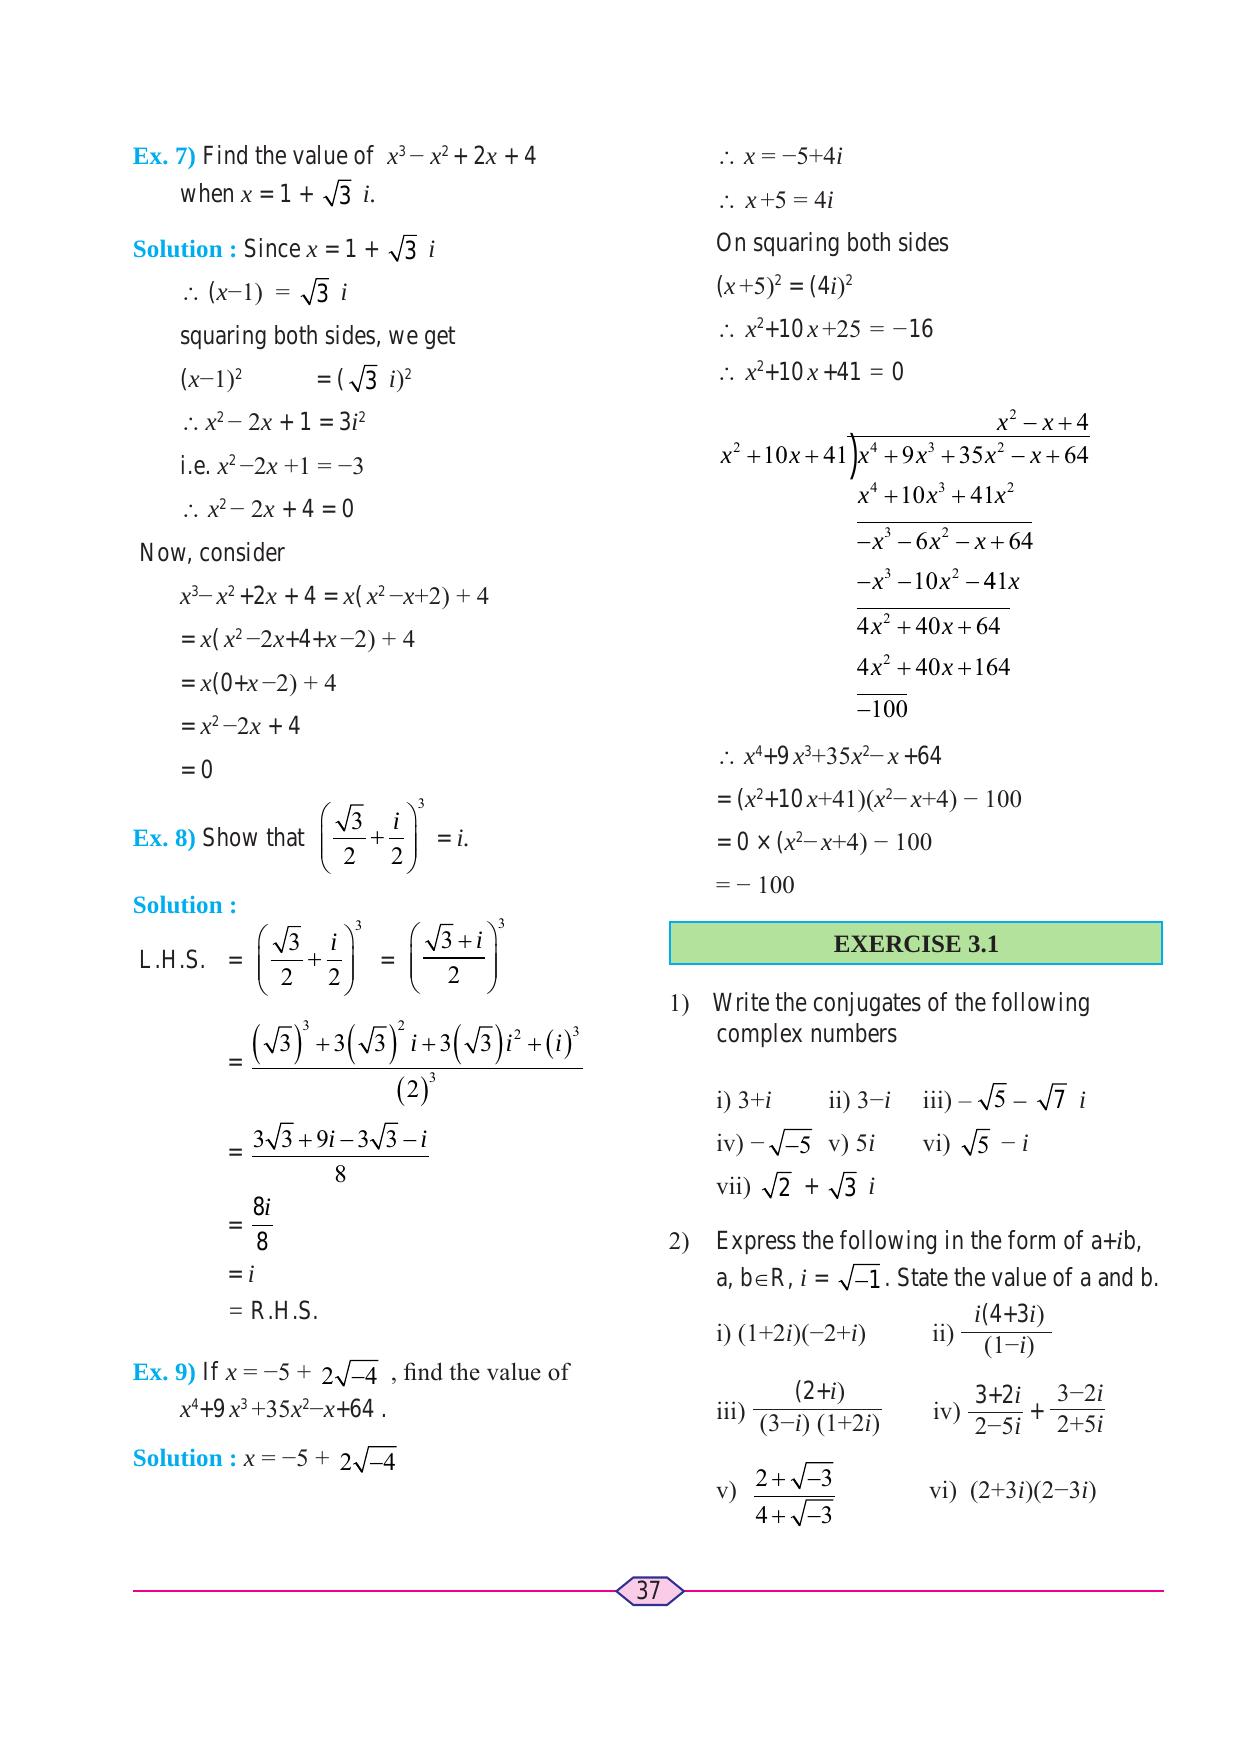 Maharashtra Board Class 11 Maths (Commerce) (Part 1) Textbook - Page 47